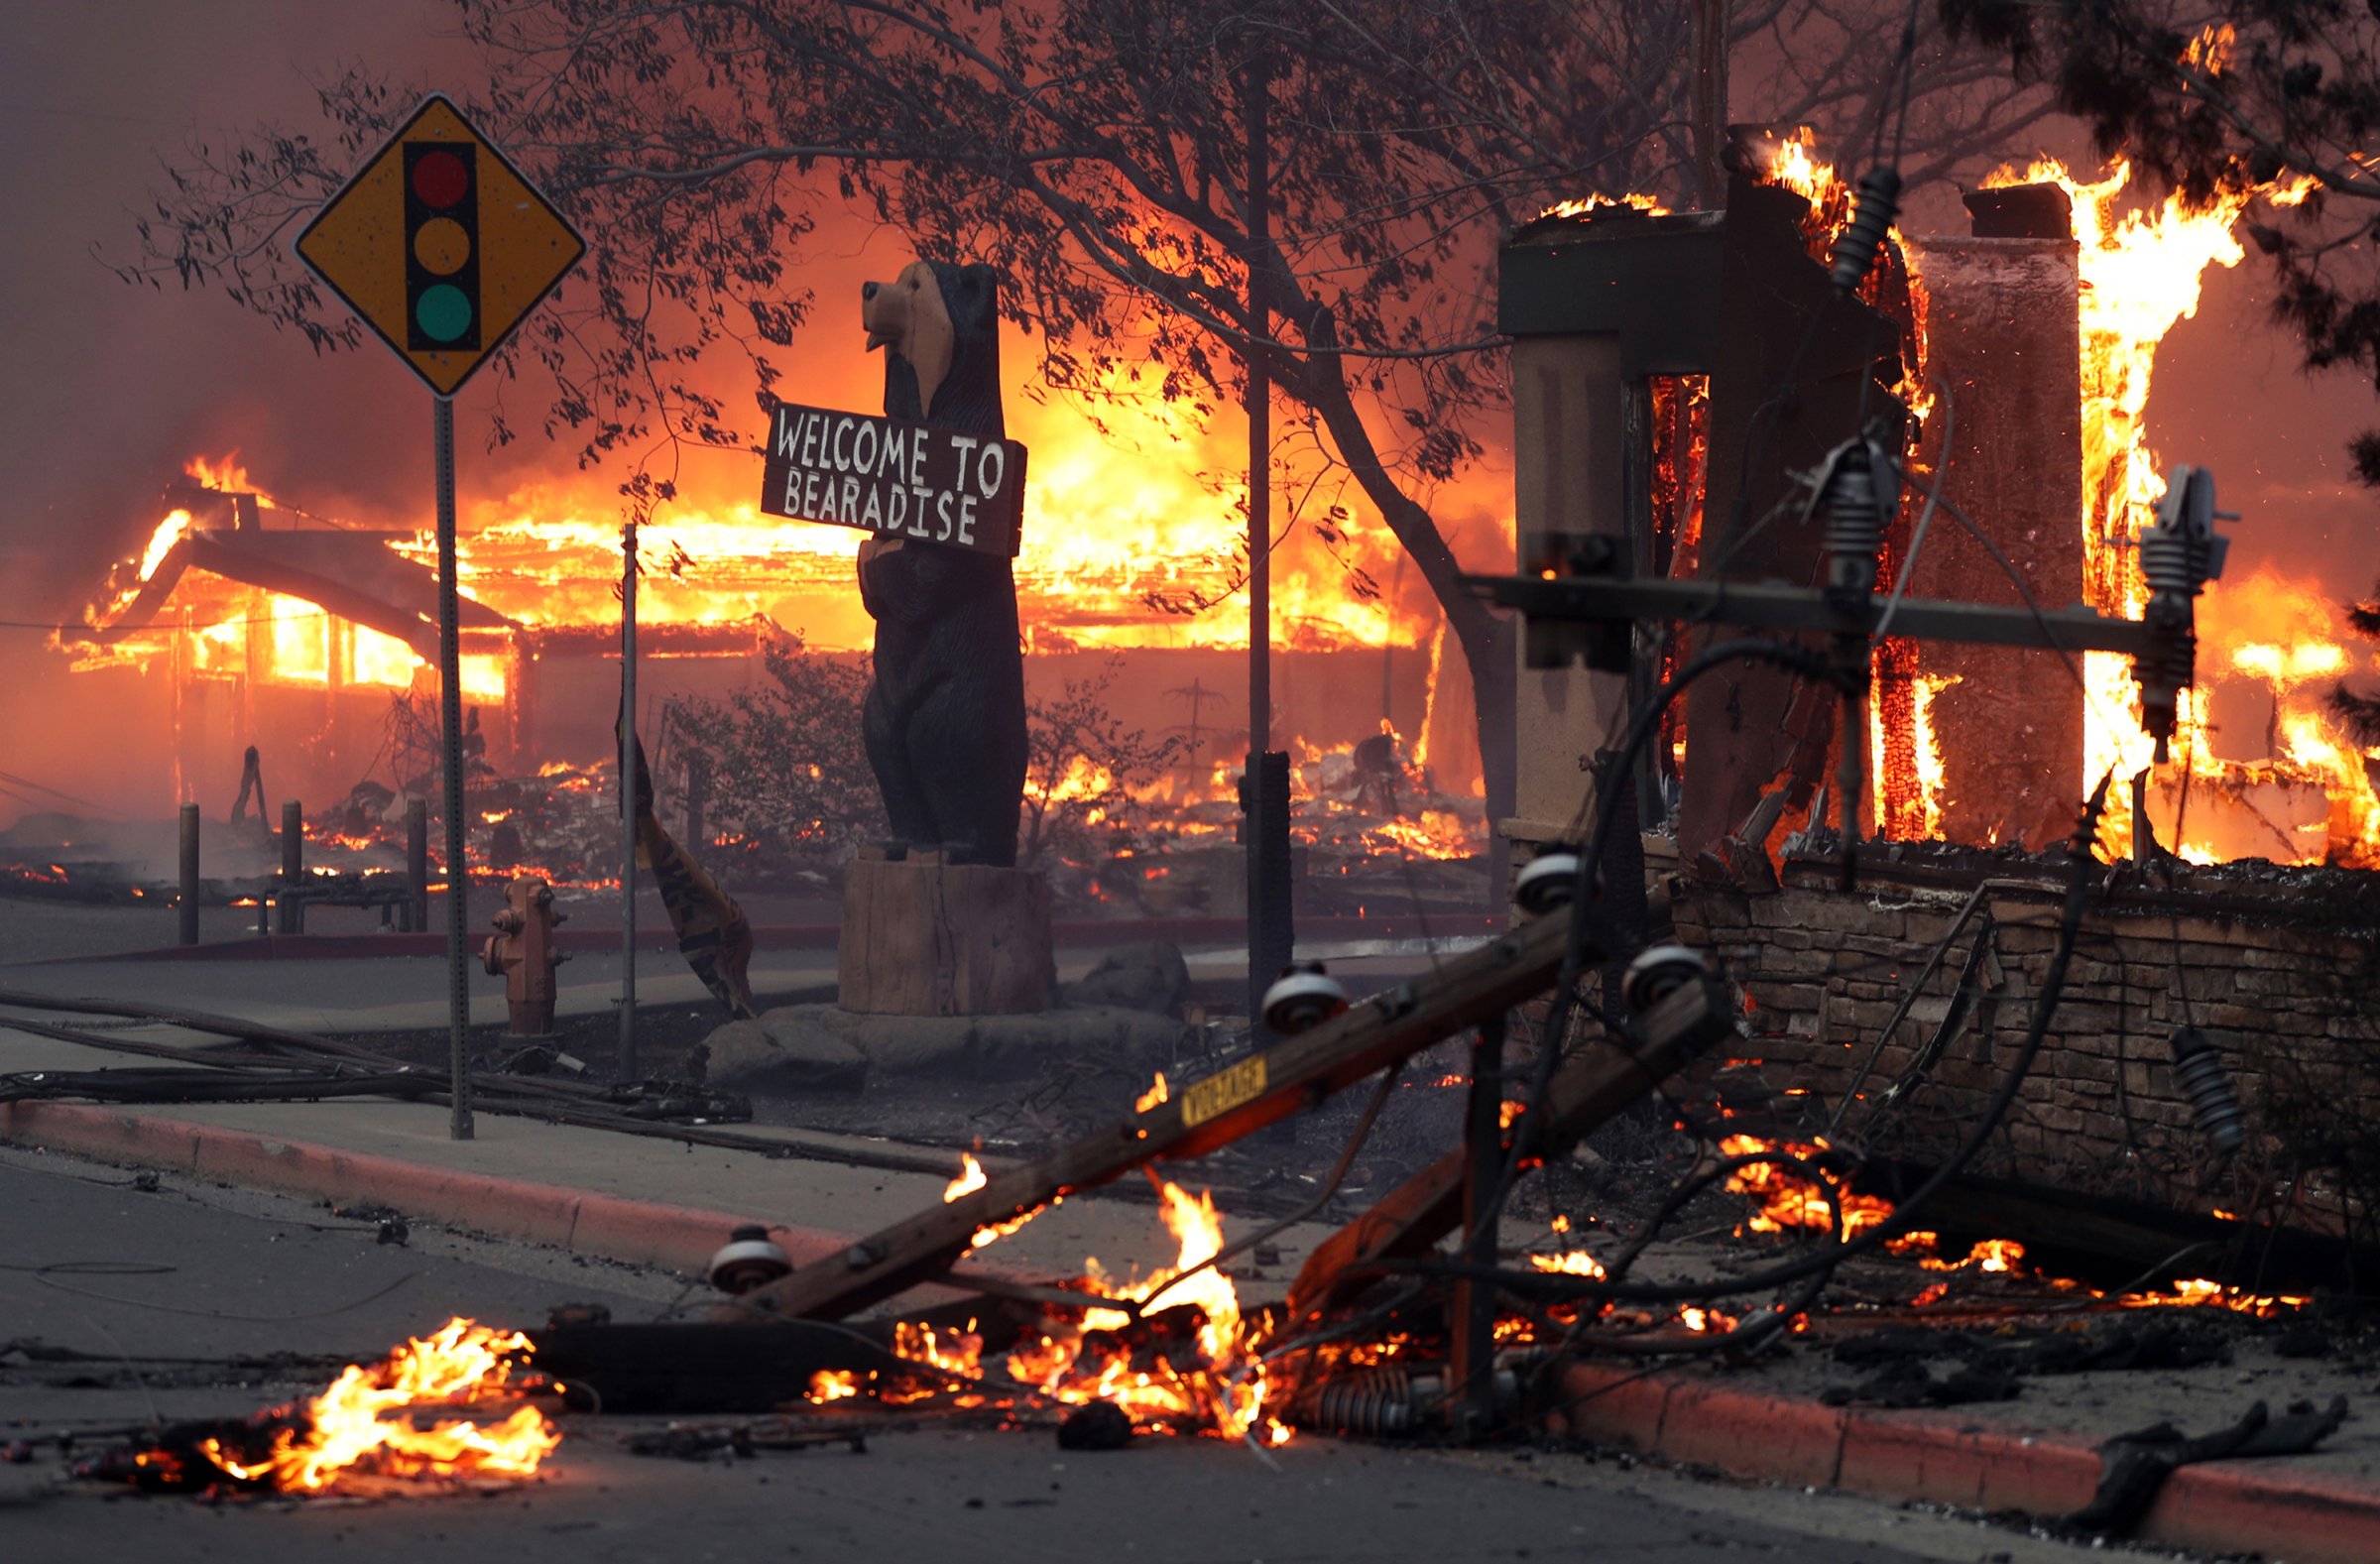 A Black Bear Diner and nearby businesses burn as the Camp Fire destroys a large portion of Paradise in Butte County, Calif.. on Thursday, November 8, 2018. The wildfire claimed 85 lives and over 14,000 structures and left 50,000 homeless.